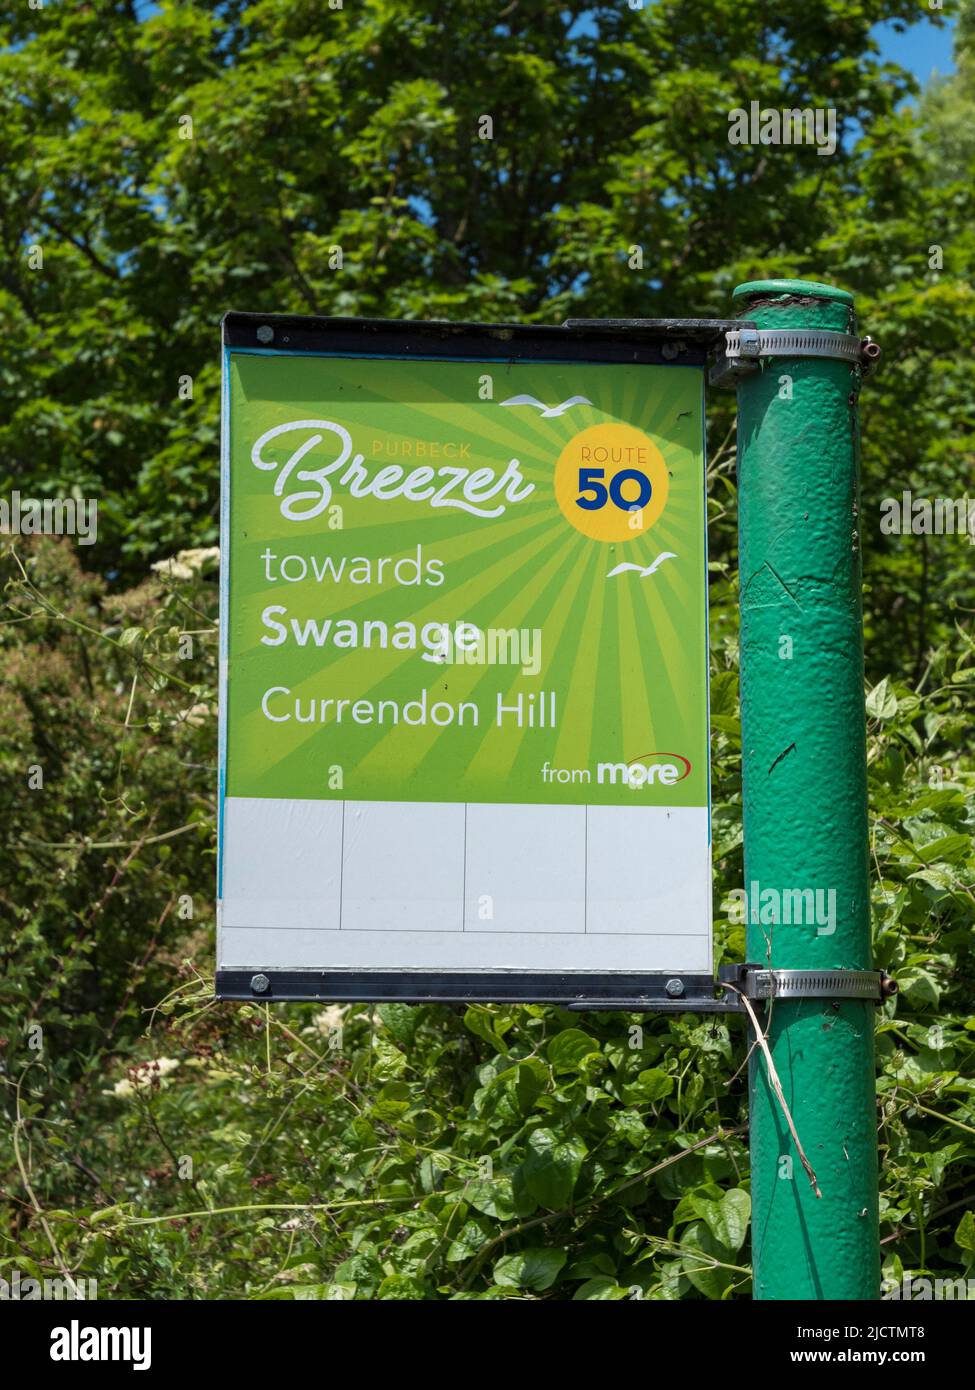 Bus stop sign for the Breezer bus heading towards Swanage in Dorset, UK. Stock Photo